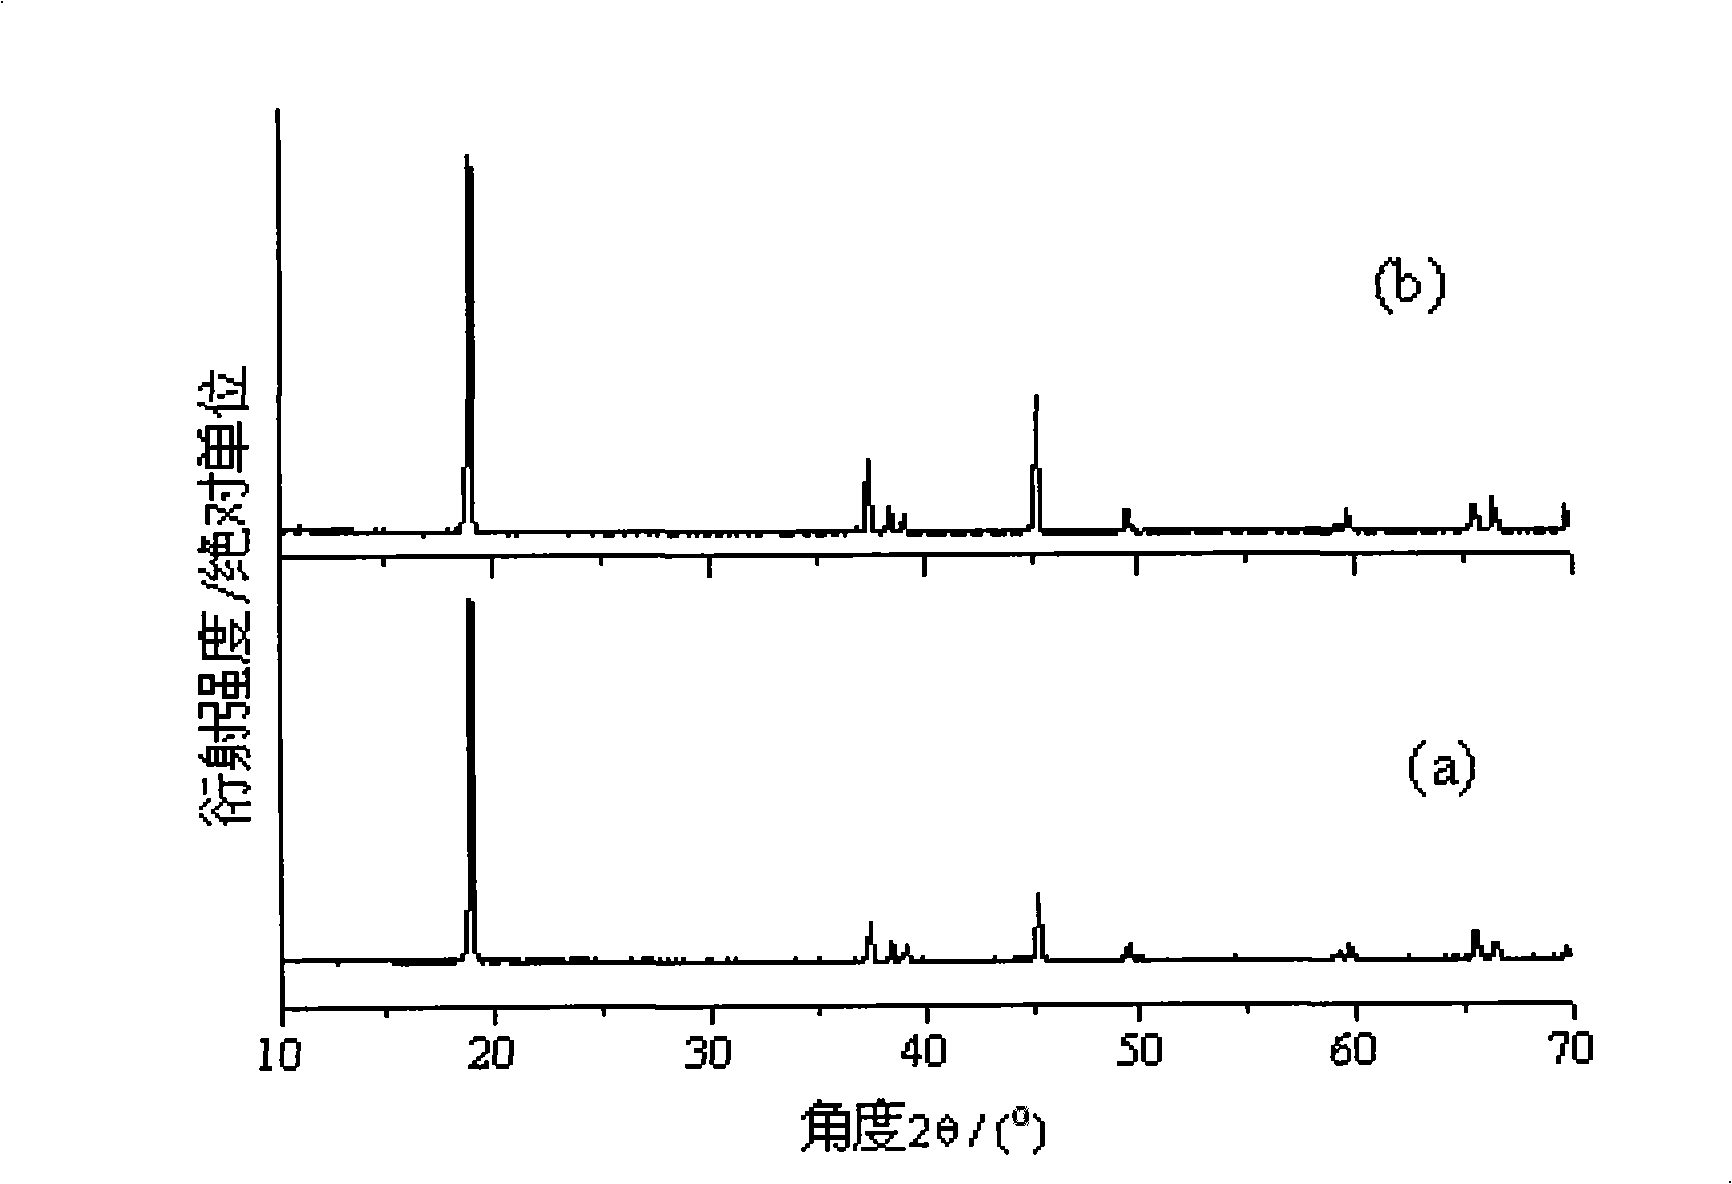 Lithium ionic cell composite positive pole material coated by orthosilicate